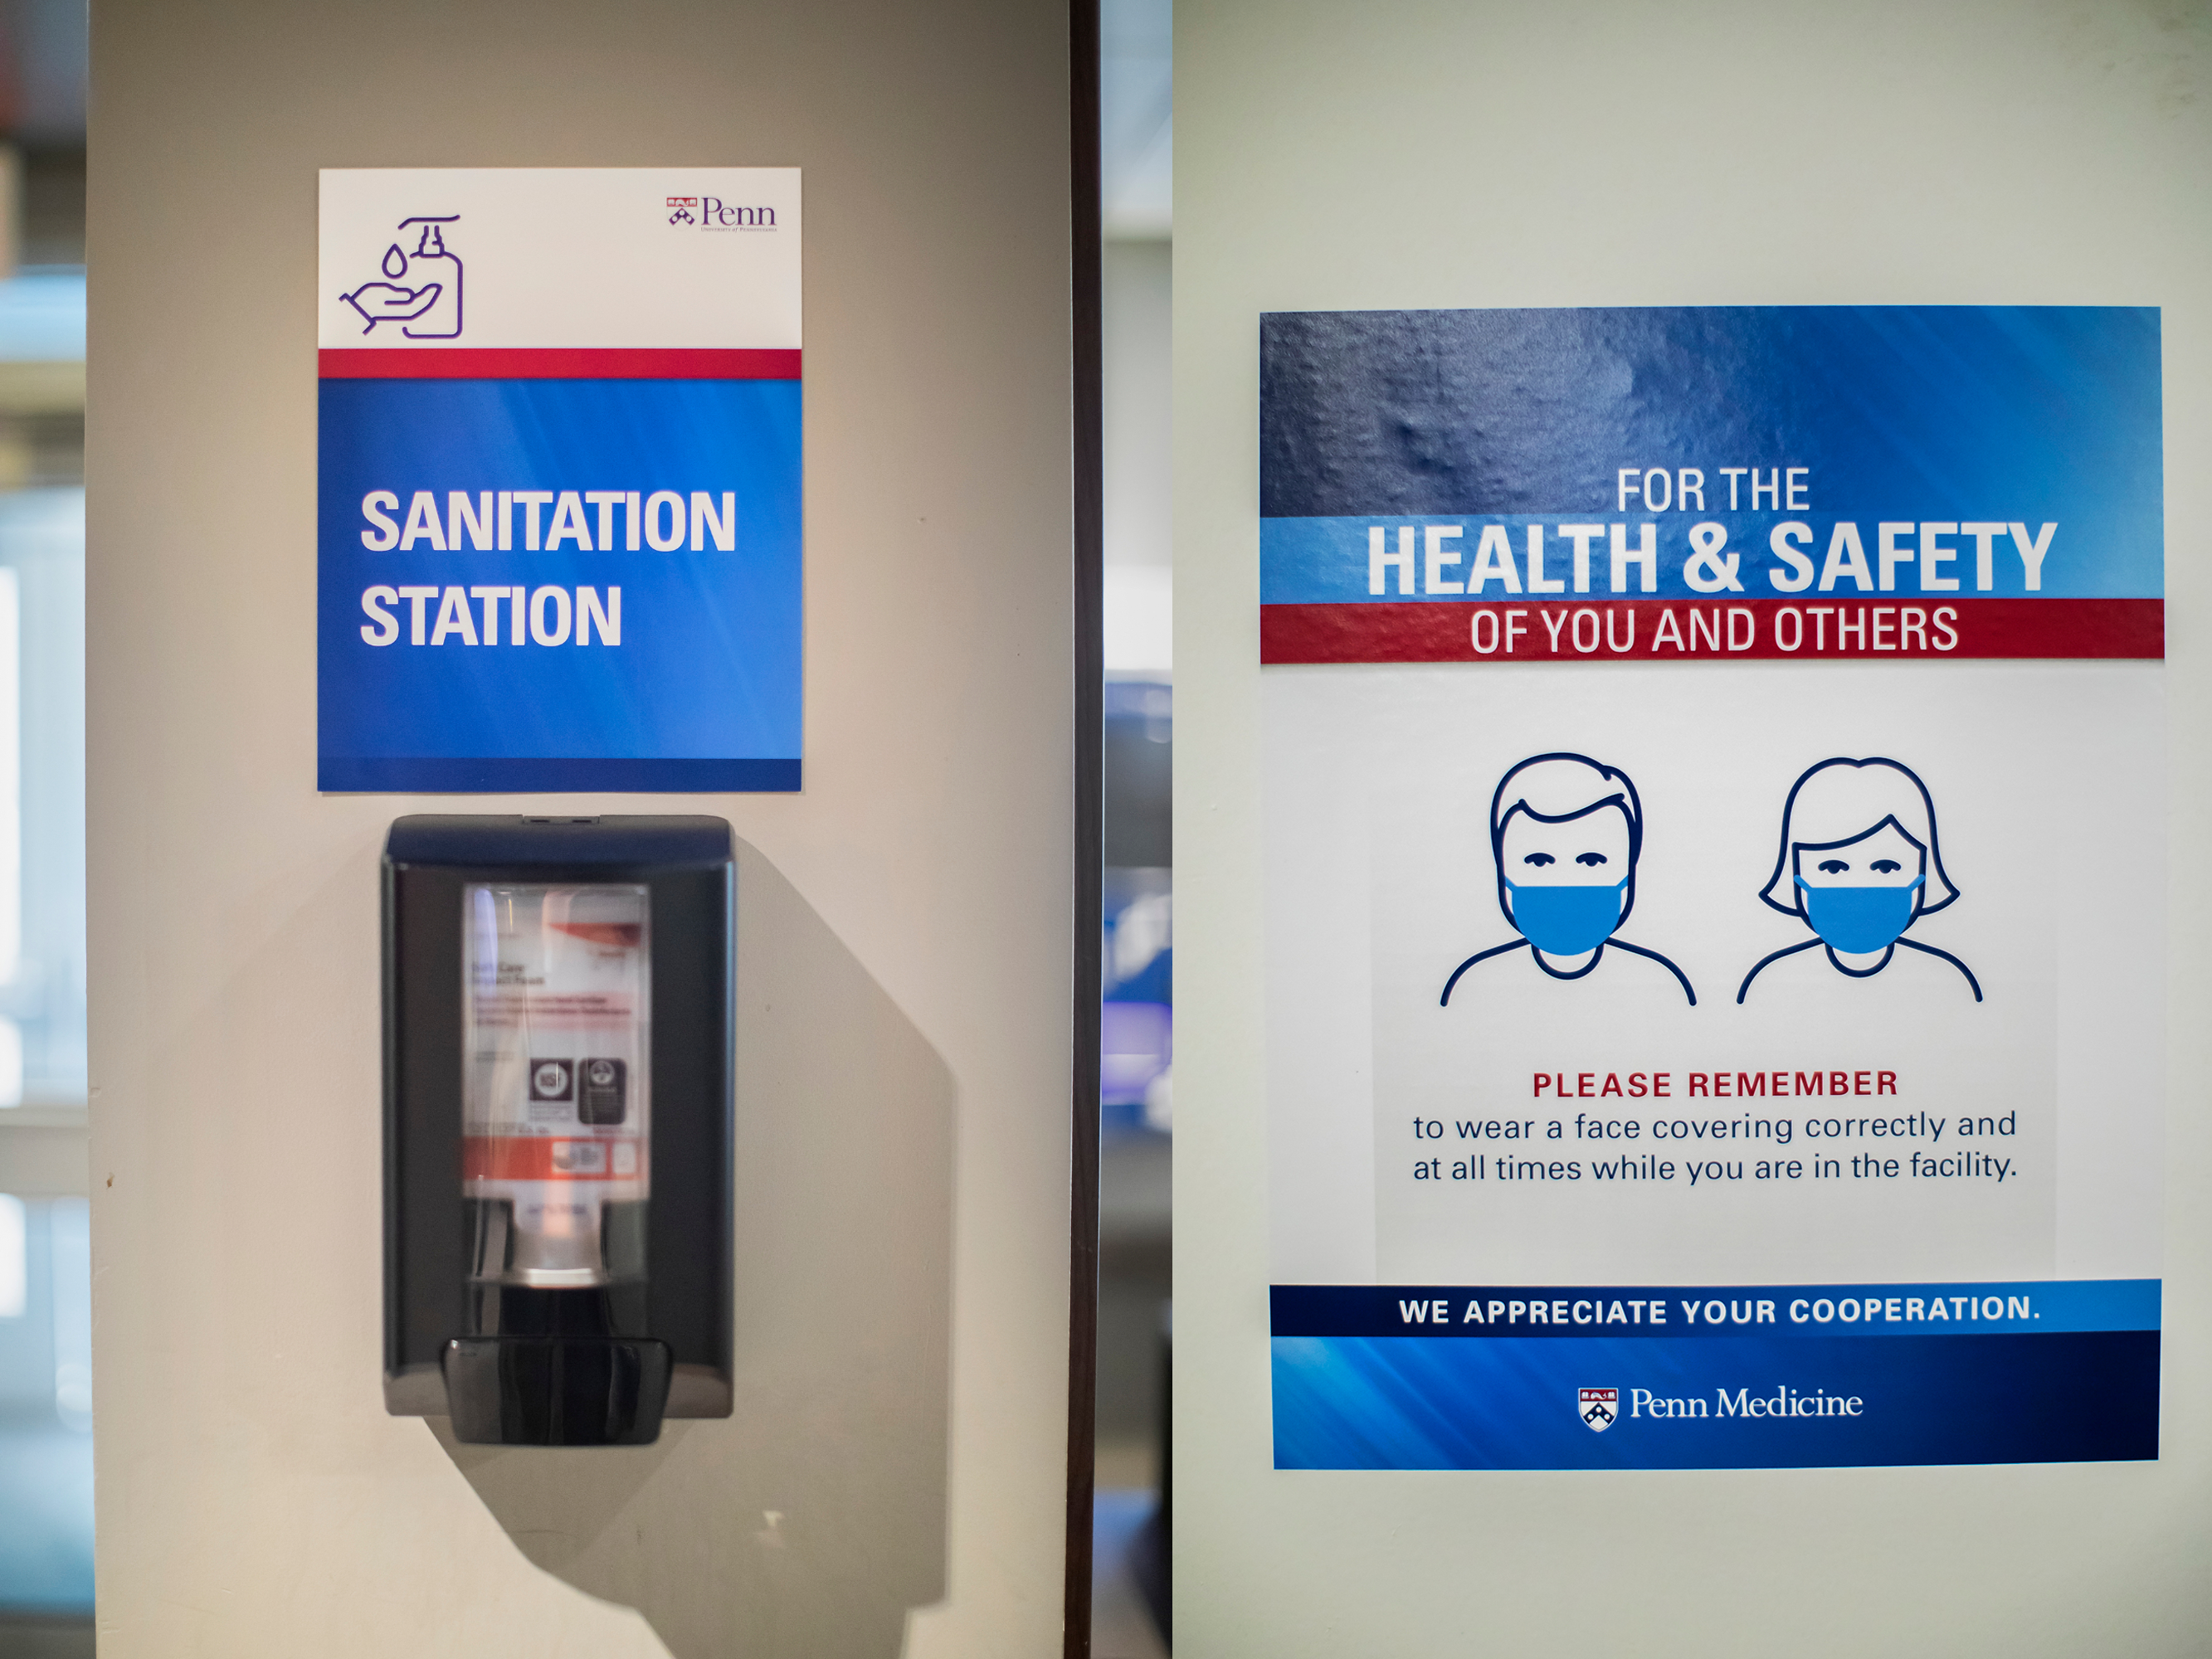 a sanitation station sign above a dispenser of hand sanitizer next to another sign that reads for the health and safety of you and others, please remember to wear a face covering correctly and at all times while you are in the facility, we appreciate your cooperation